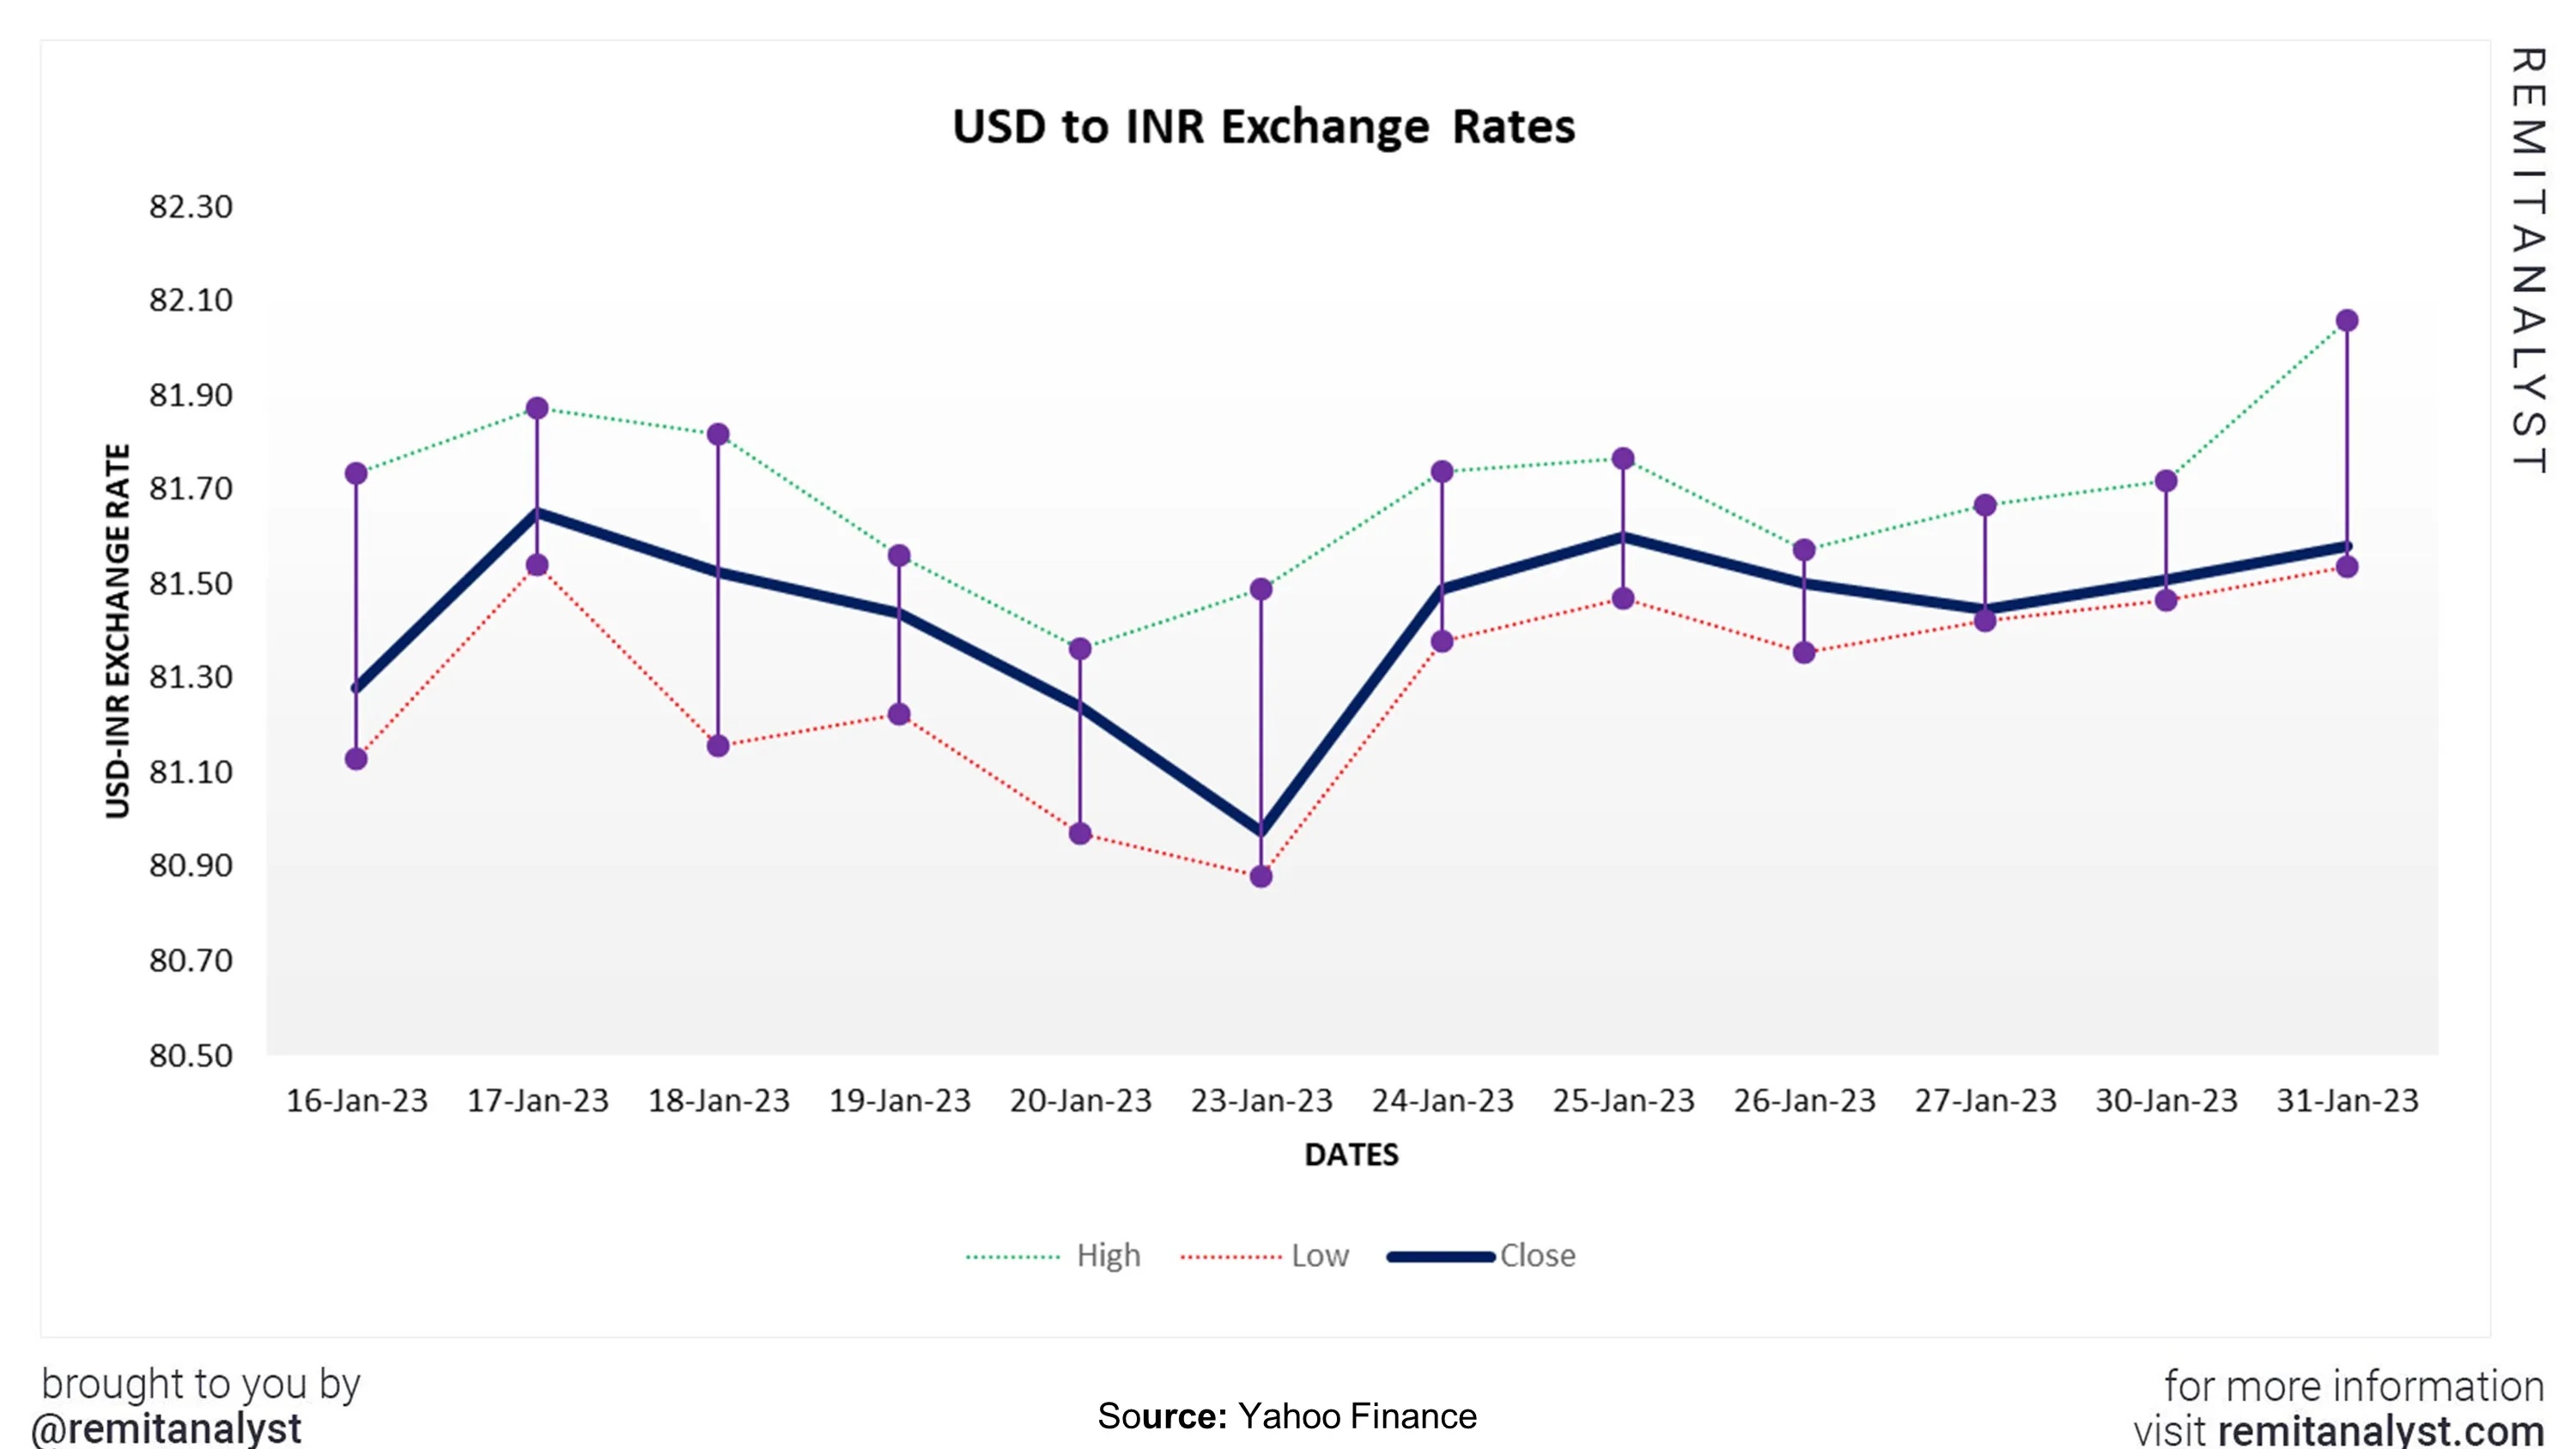 usd-to-inr-exchange-rate-from-16-jan-2023-to-31-jan-2023